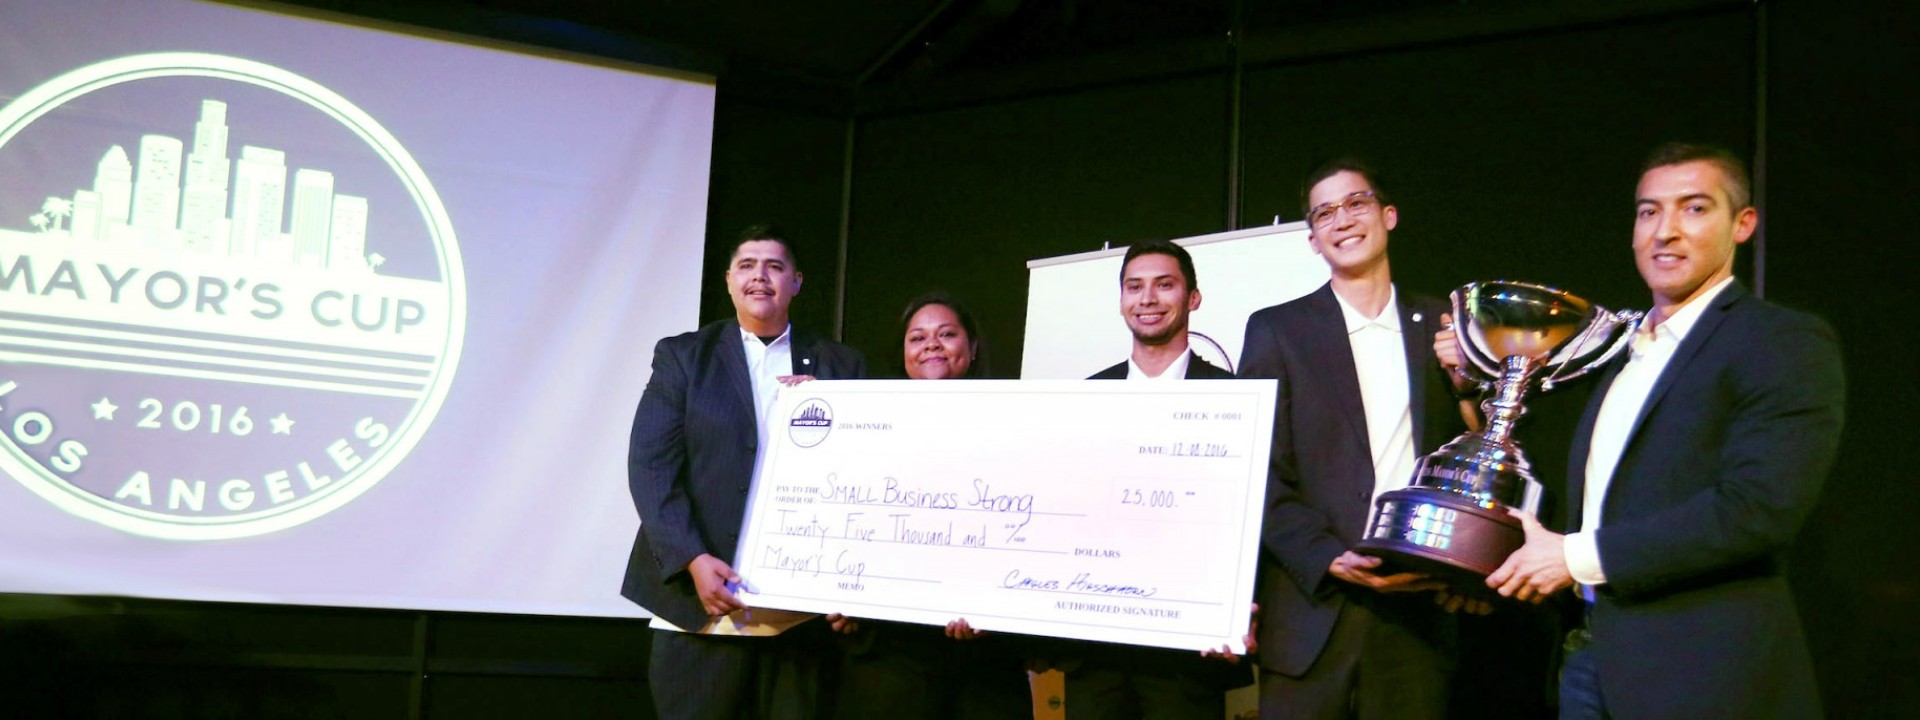 Group of Cal State LA students in business attire on a stage holding a large check near a screen that says "2016 Mayor's Cup"